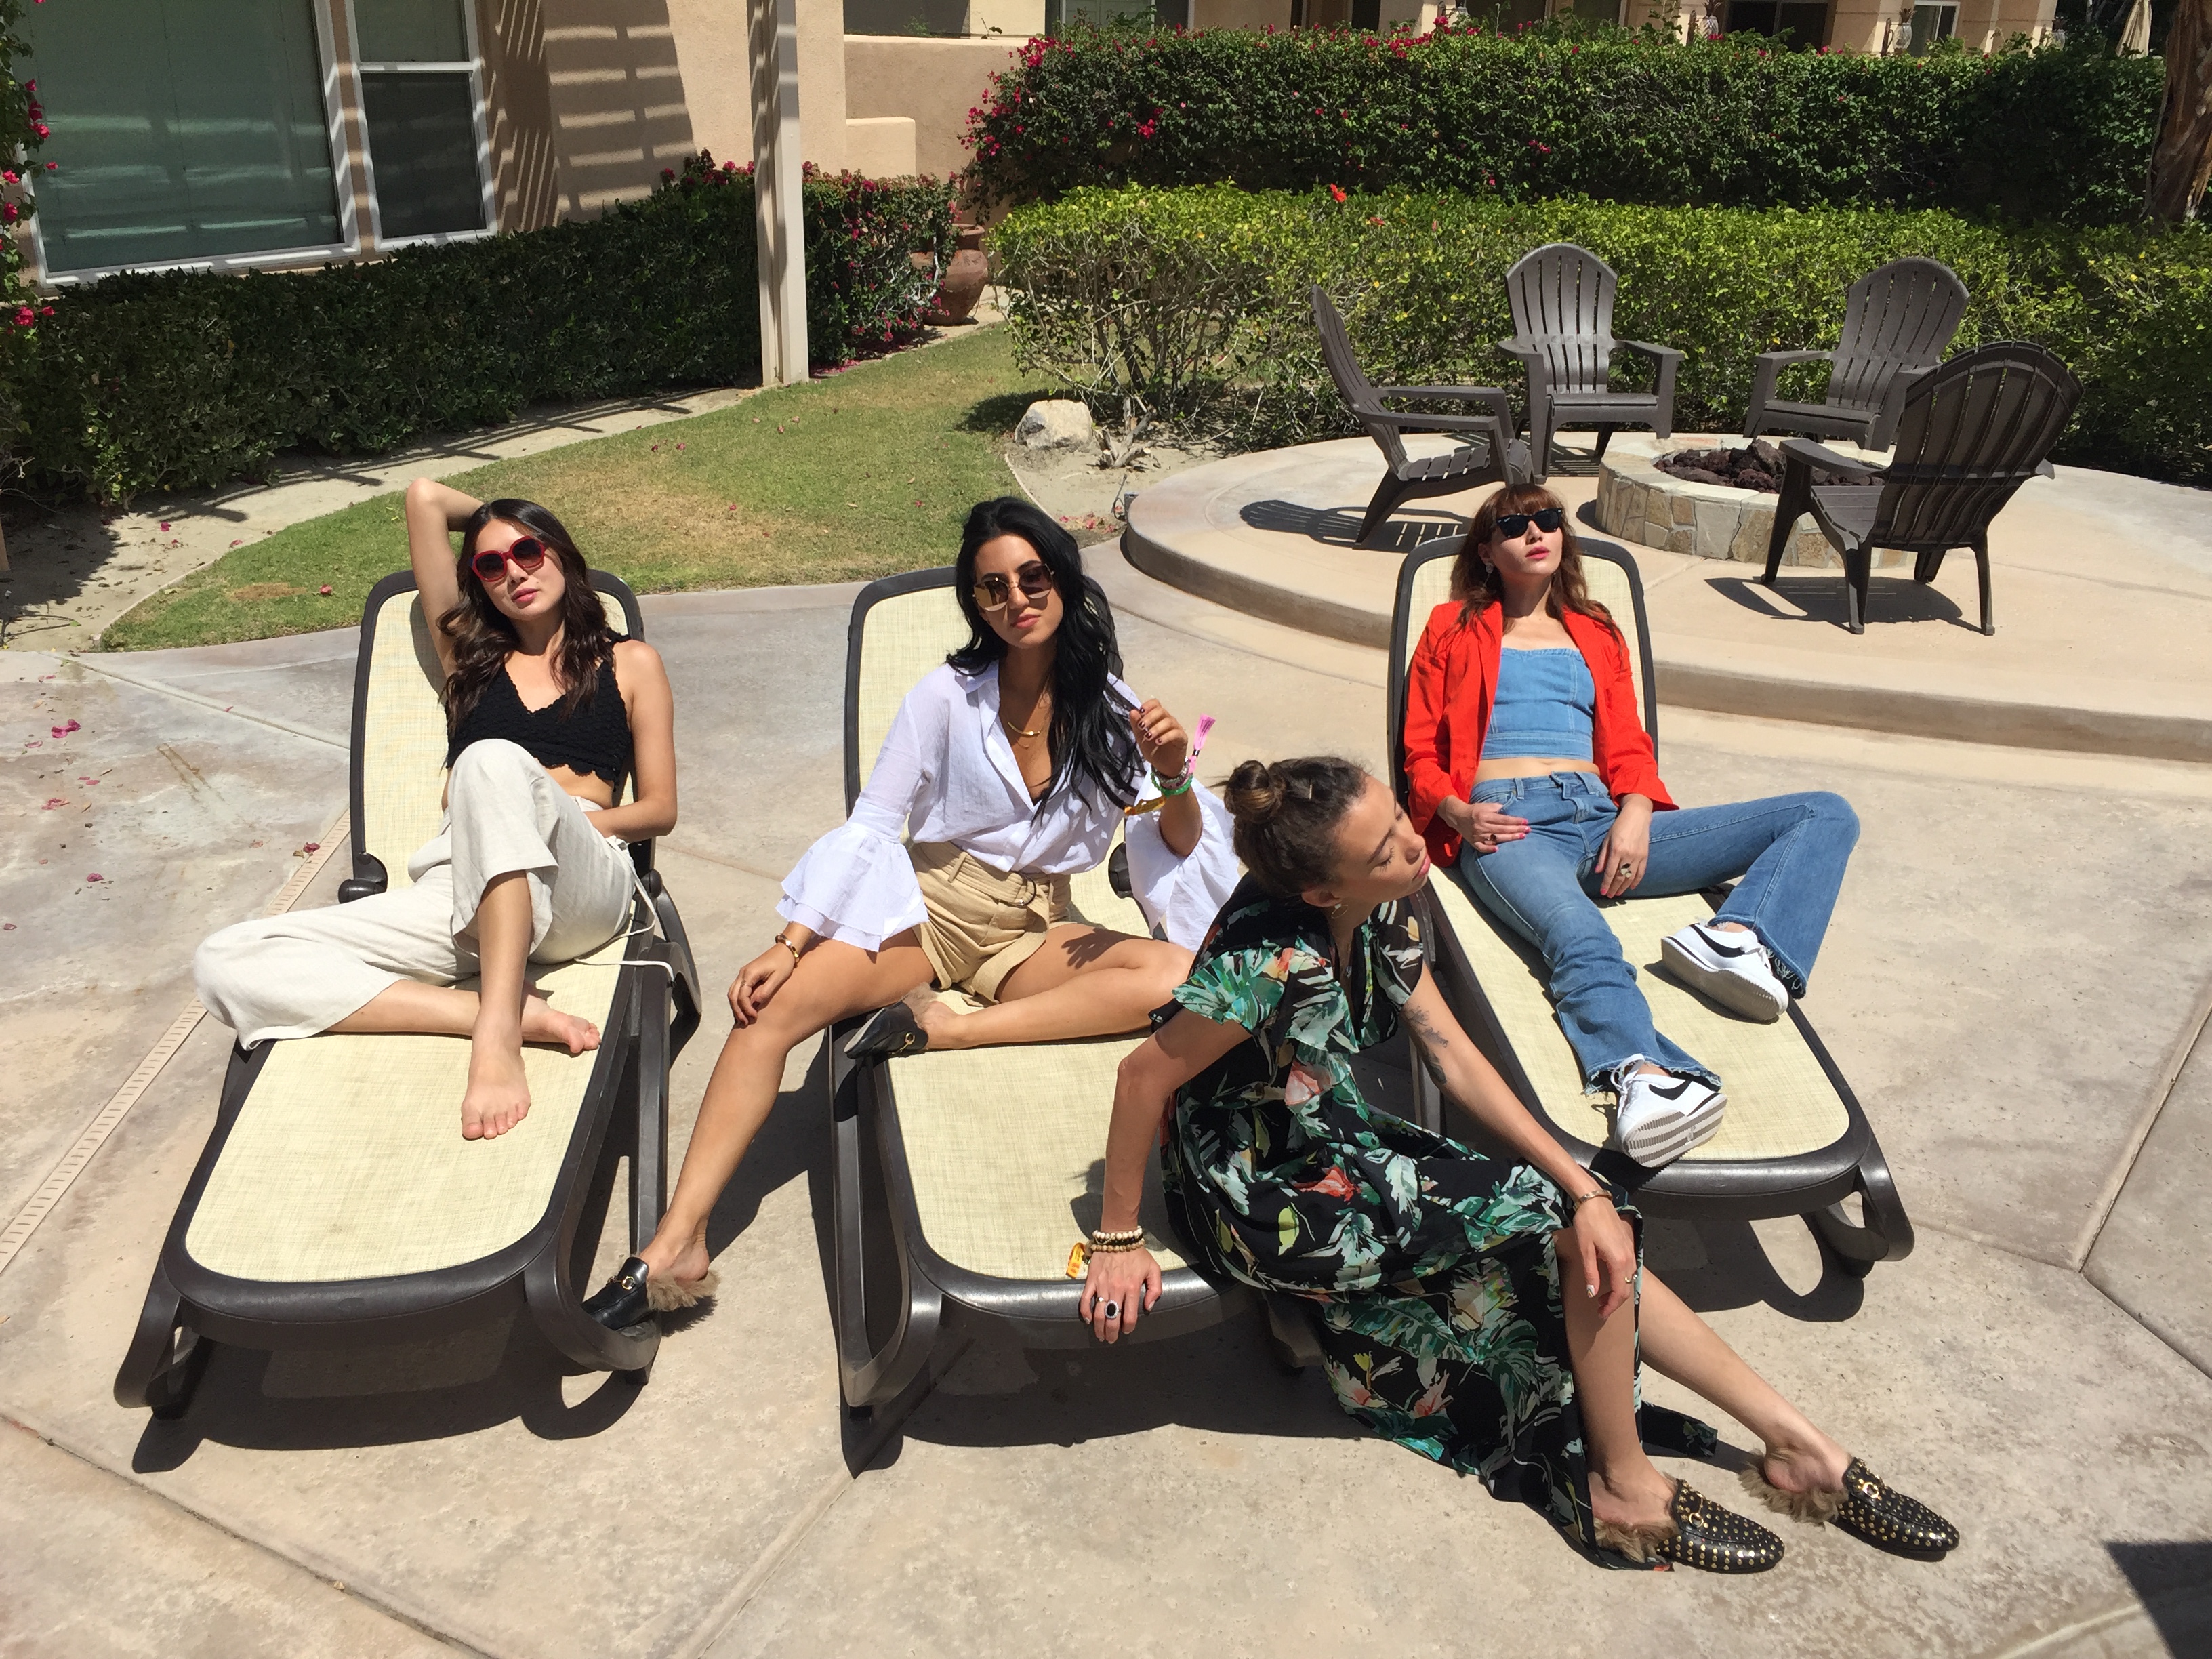 LA Blogger Tania Sarin on coachella weekend featuring festival style with gucci mule slippers by the pool